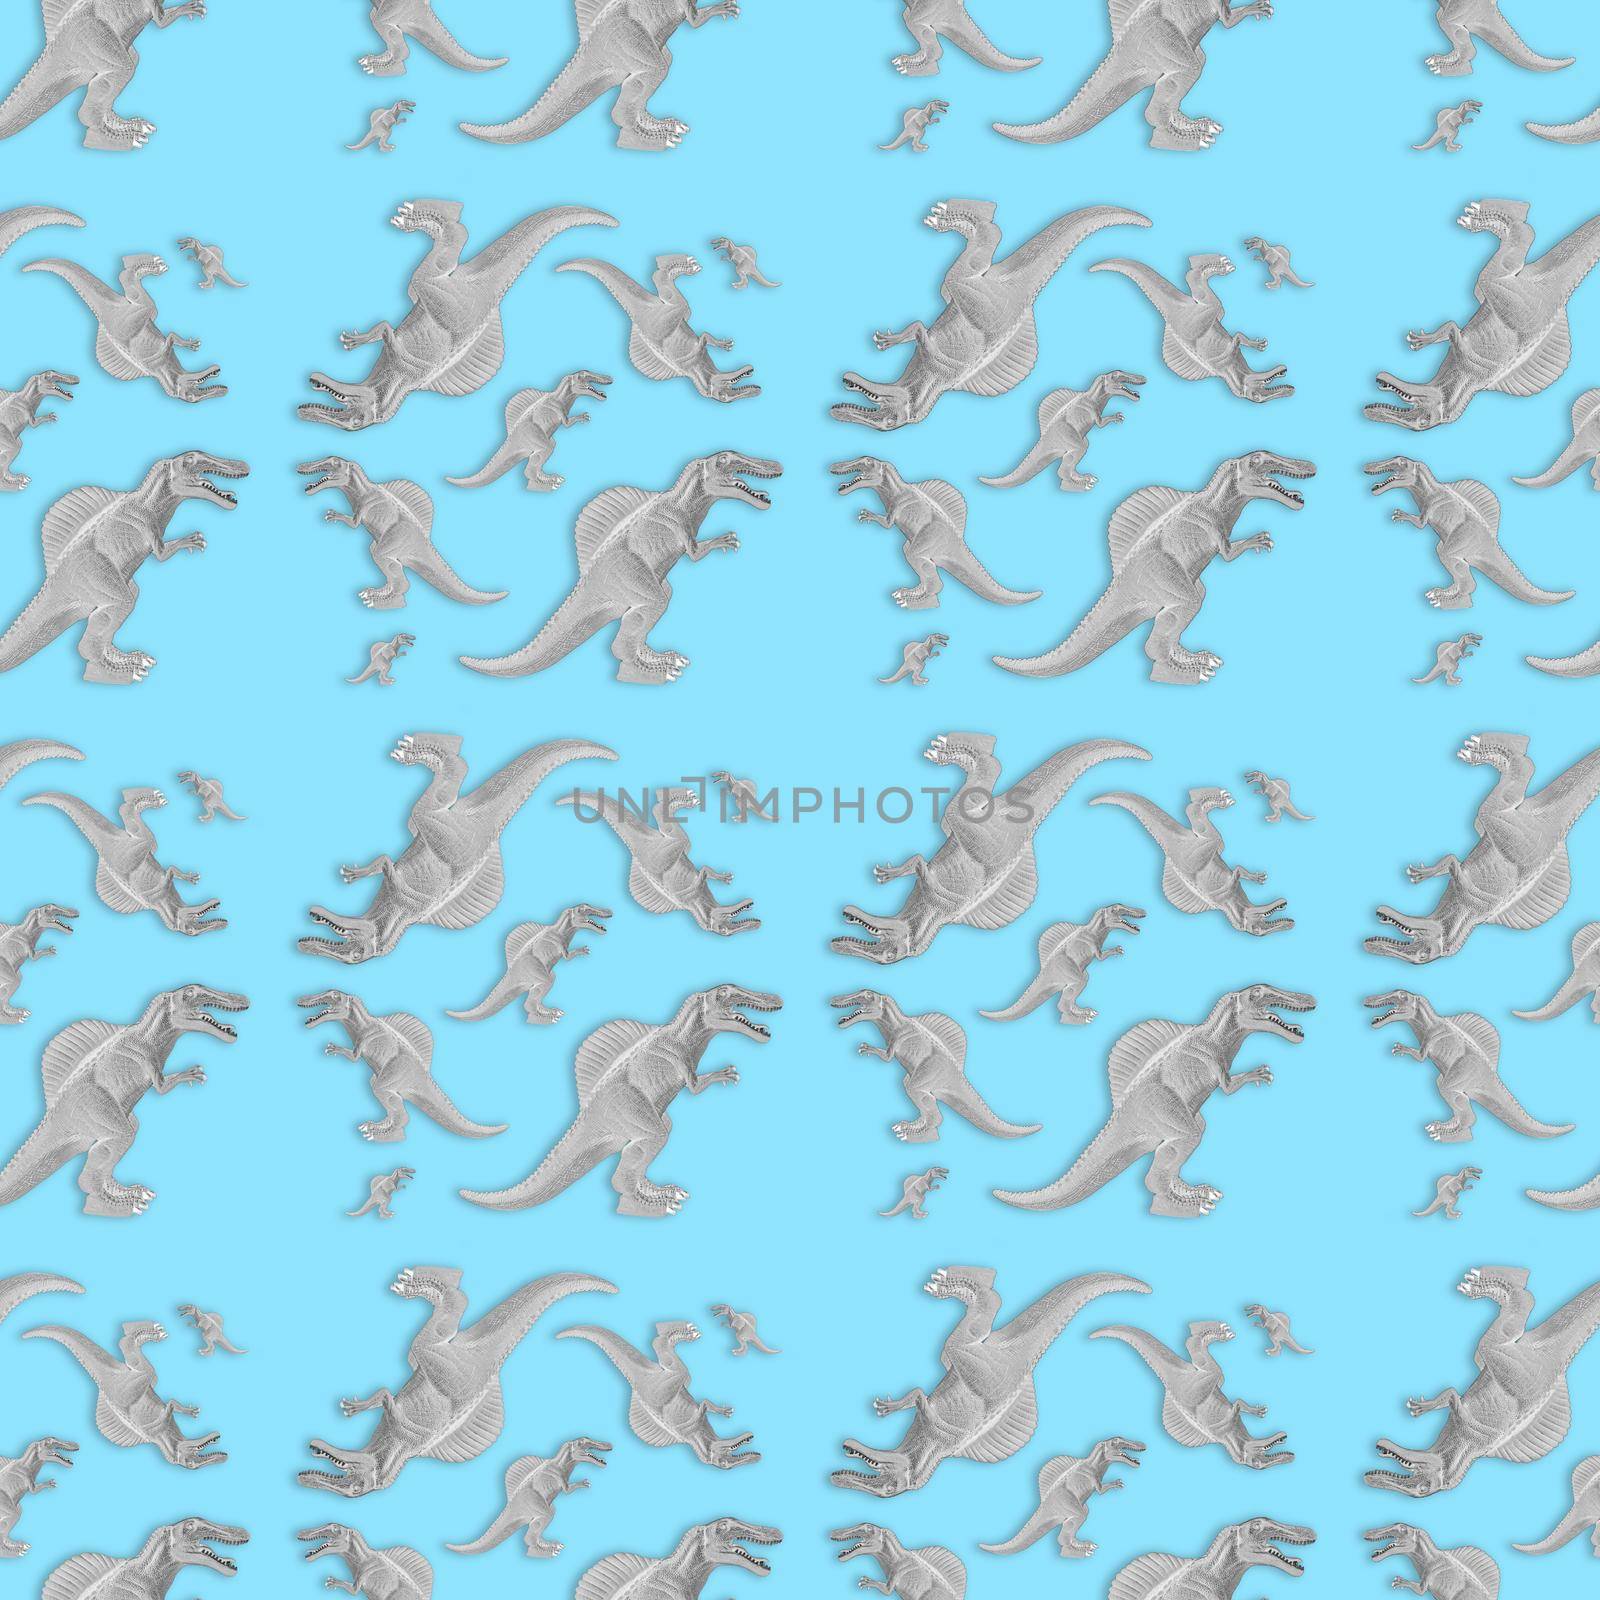 Creative seamless dinosaur pattern on blue background. Abstract art. The concept of minimalism.